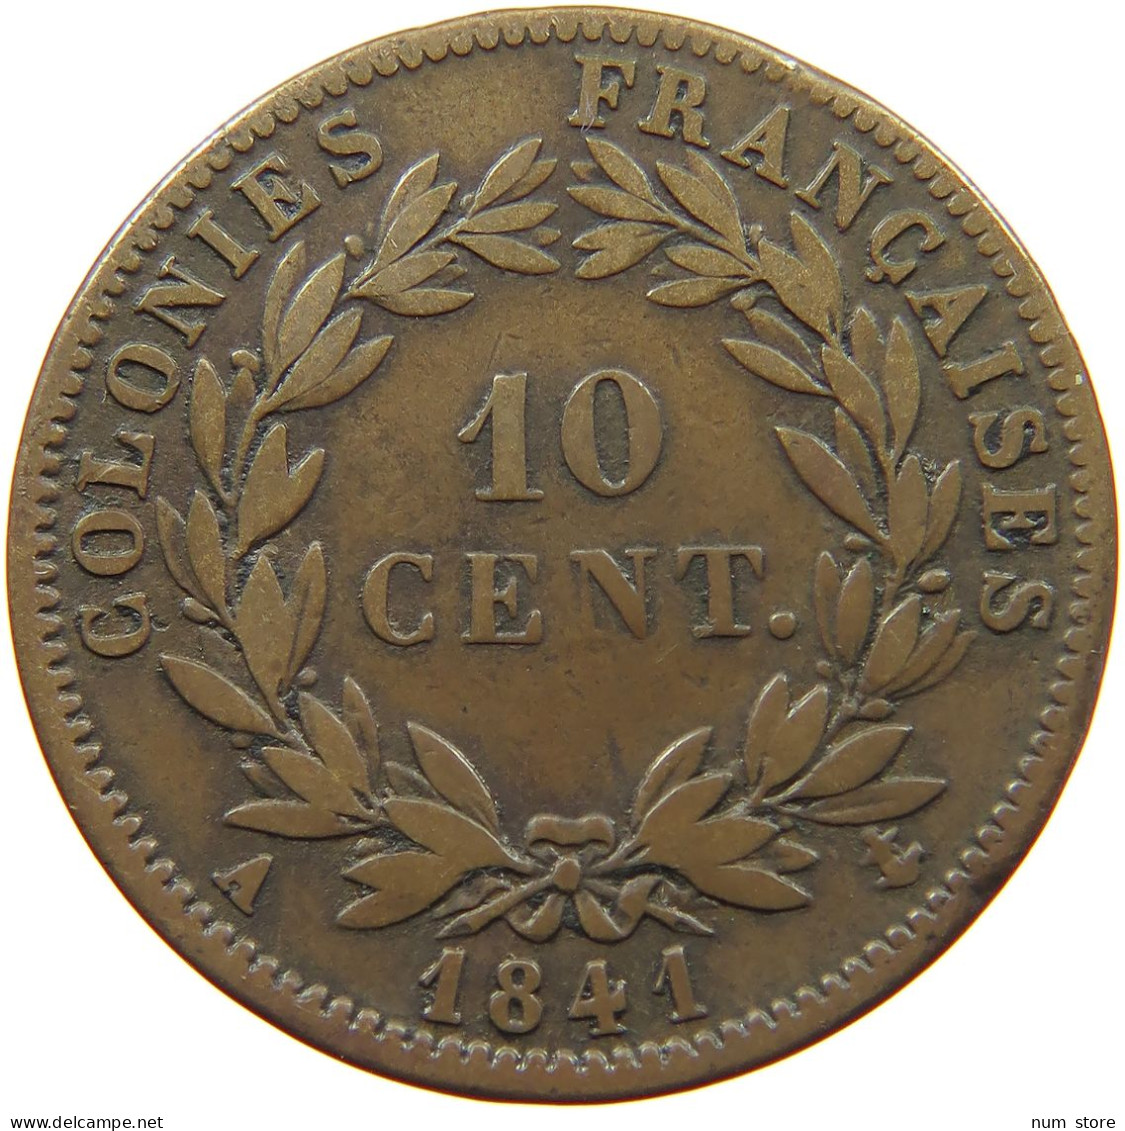 FRANCE COLONIES 10 CENTIMES 1841 A LOUIS PHILIPPE I. (1830-1848) #t161 0183 - French Colonies (1817-1844)